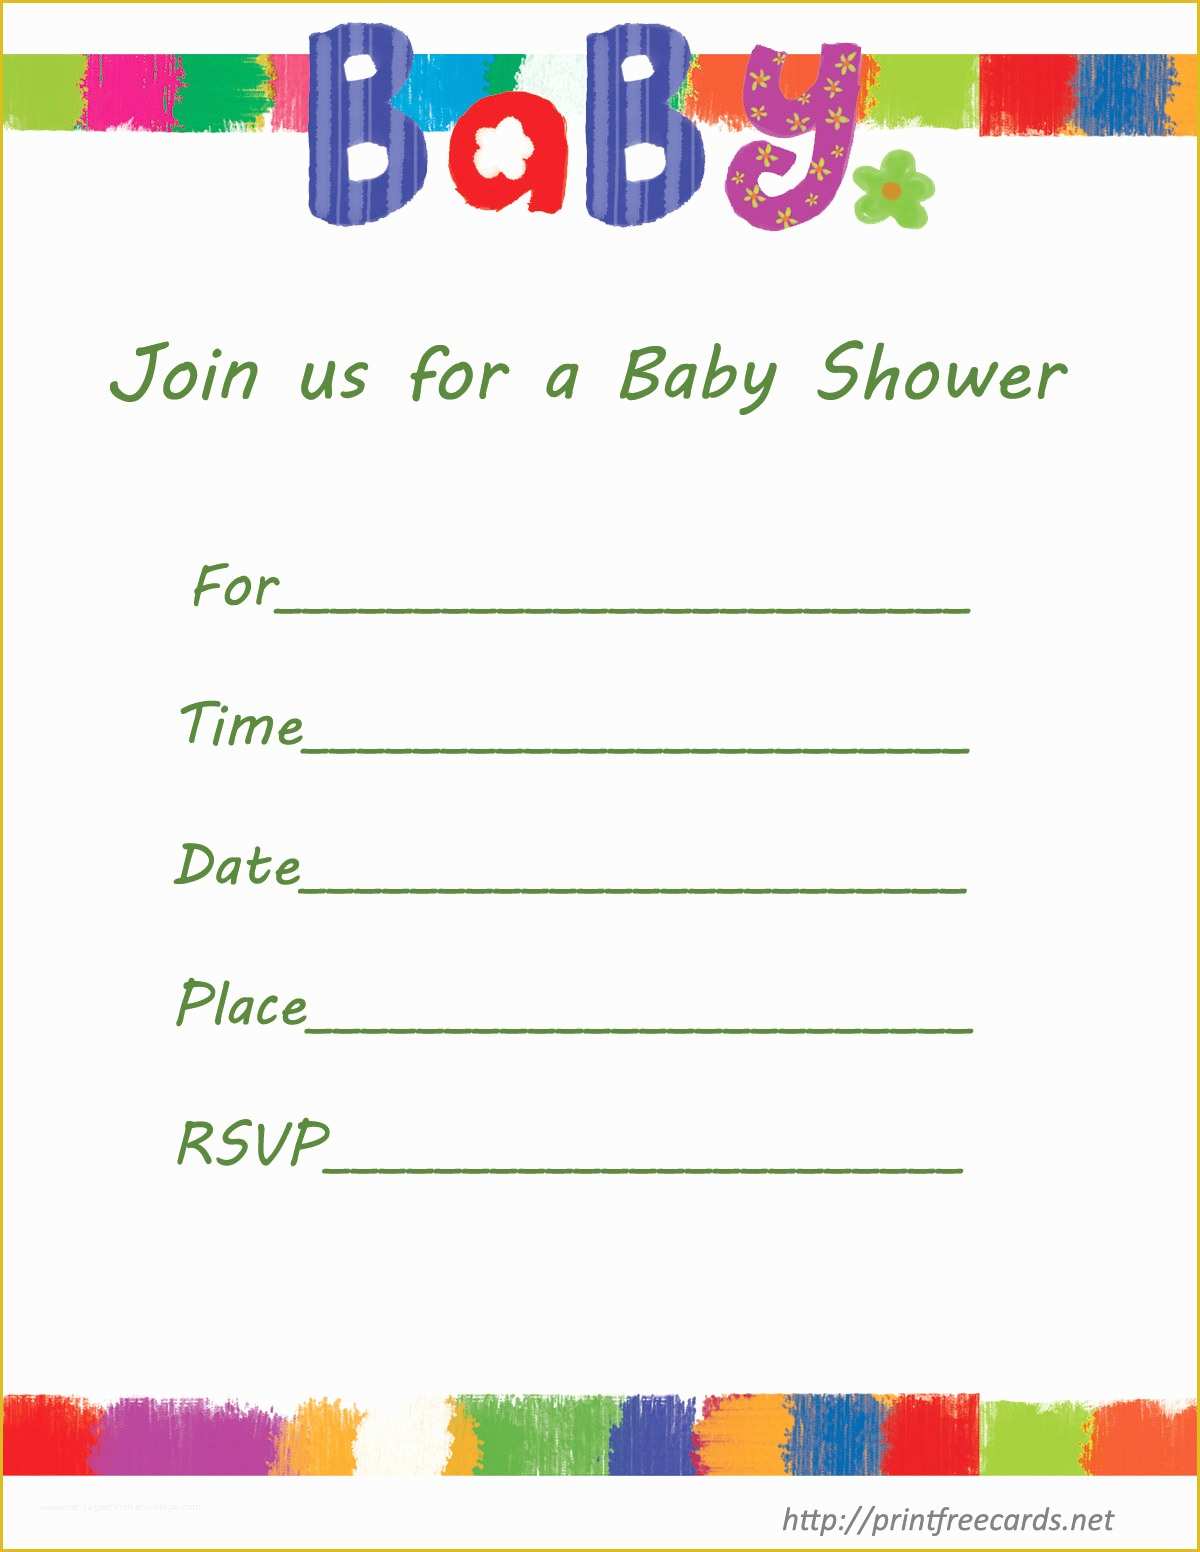 Free Printable Baby Shower Cards Templates Of Free Baby Shower Cards Free Printable Baby Shower